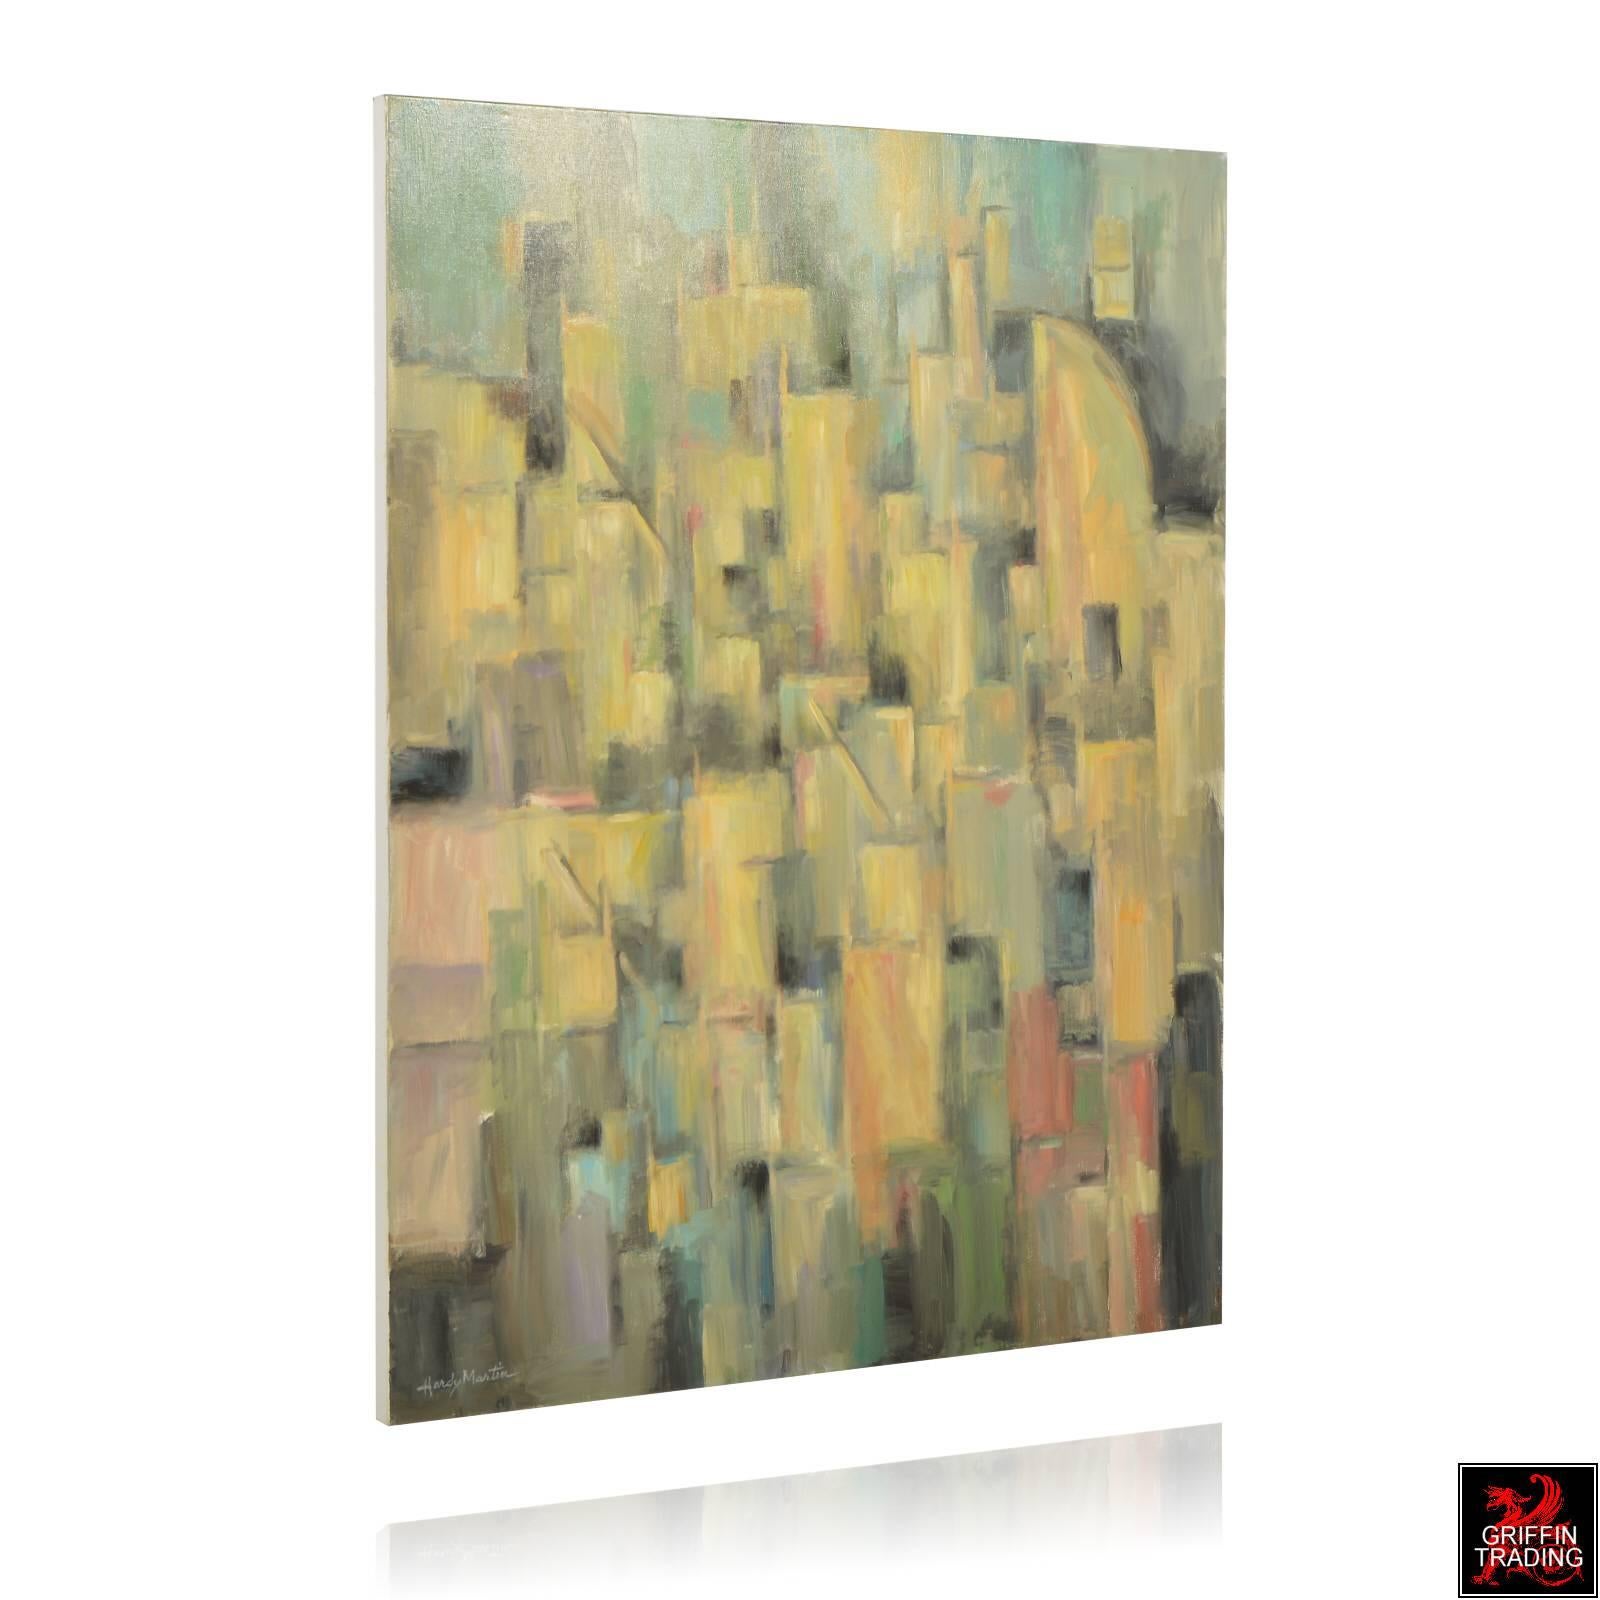 This large Cubist style painting depicts a cityscape filled with geometric forms representing buildings. Looking like a busy Metropolis, the artist captured the look and feel of an antique painting with his use of color and form. His influence was